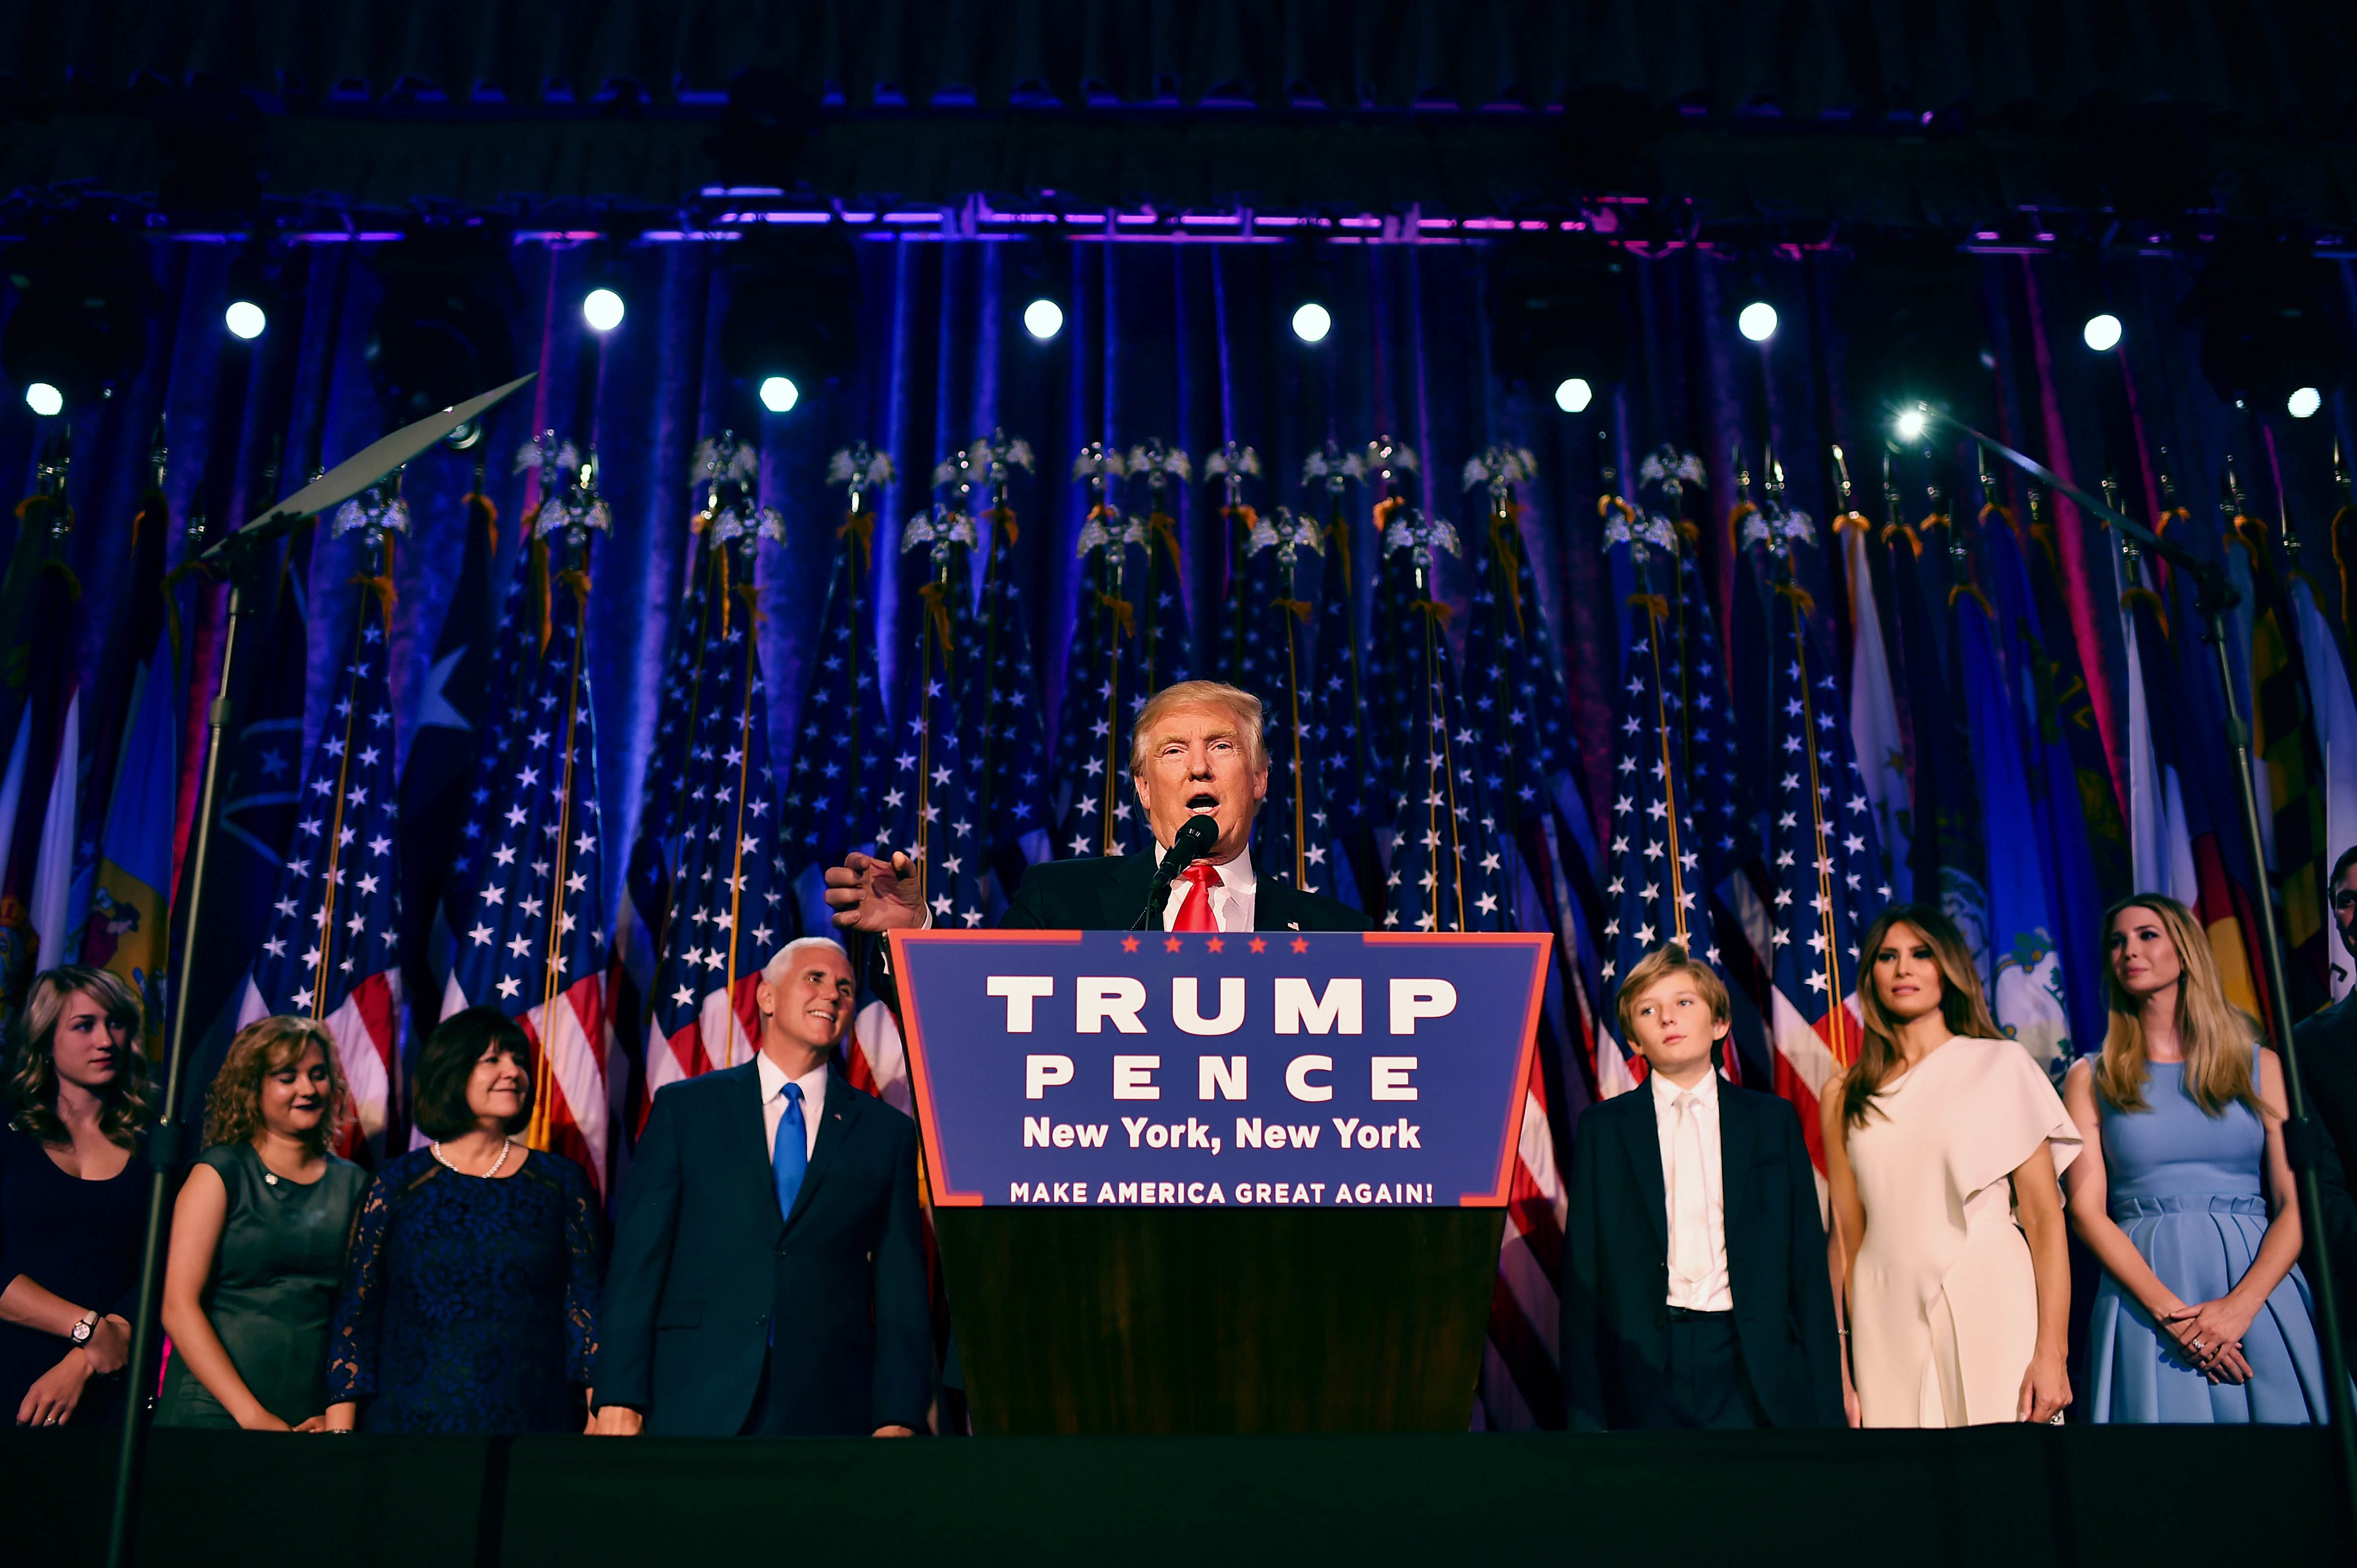 President-elect Donald Trump, with his family, addresses supporters at an election night event at the New York Hilton Midtown November 8, 2016 in New York City, New York. (Jabin Botsford—The Washington Post/Getty Images)